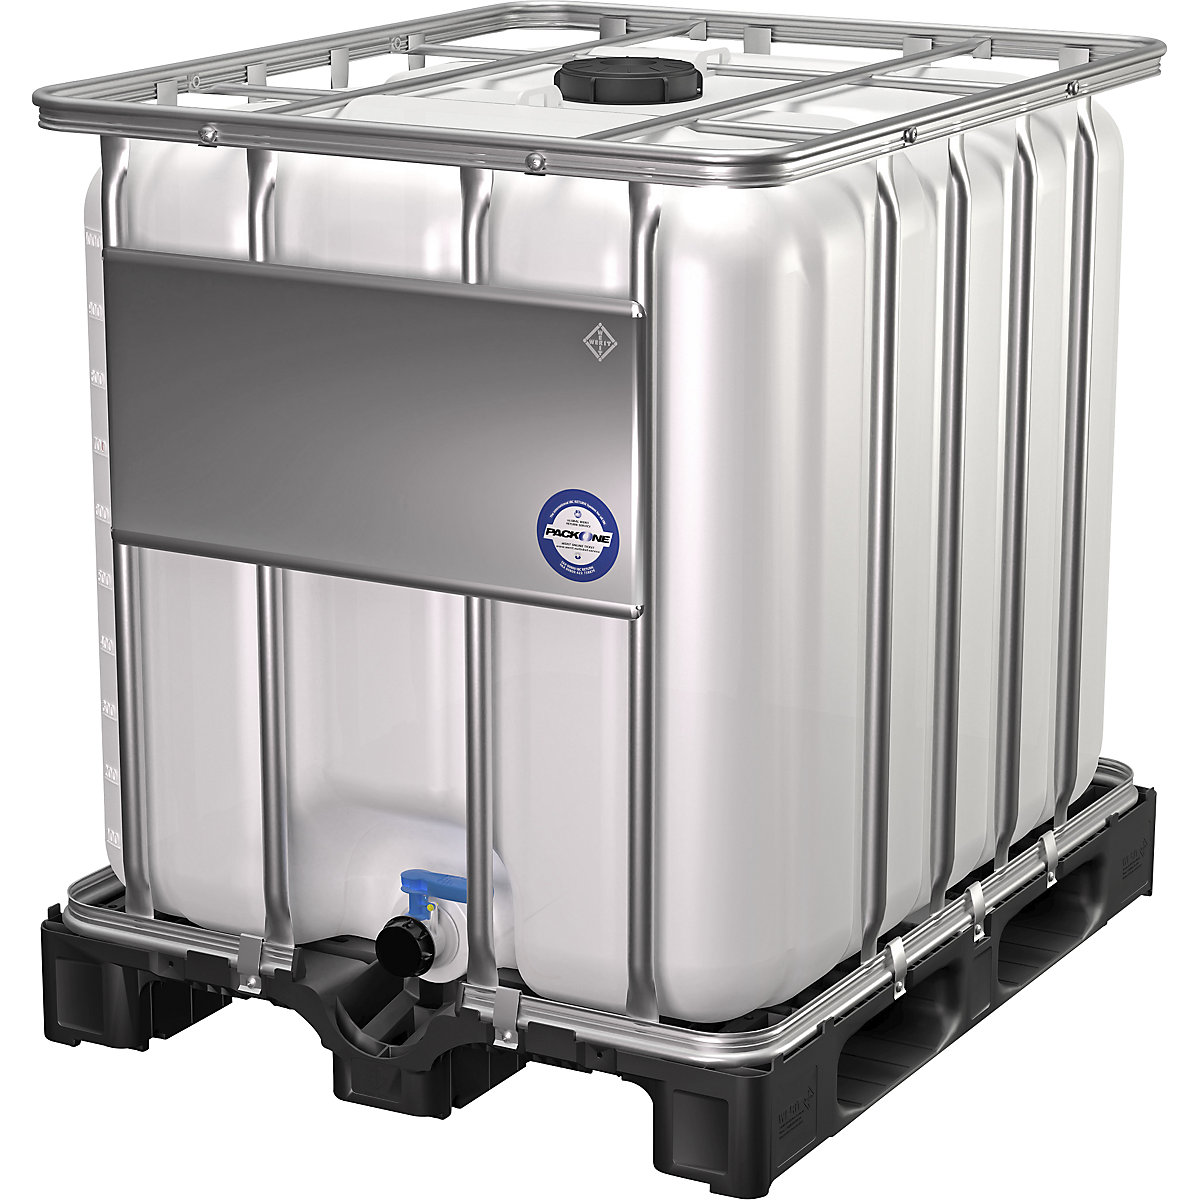 Container IBC, standard